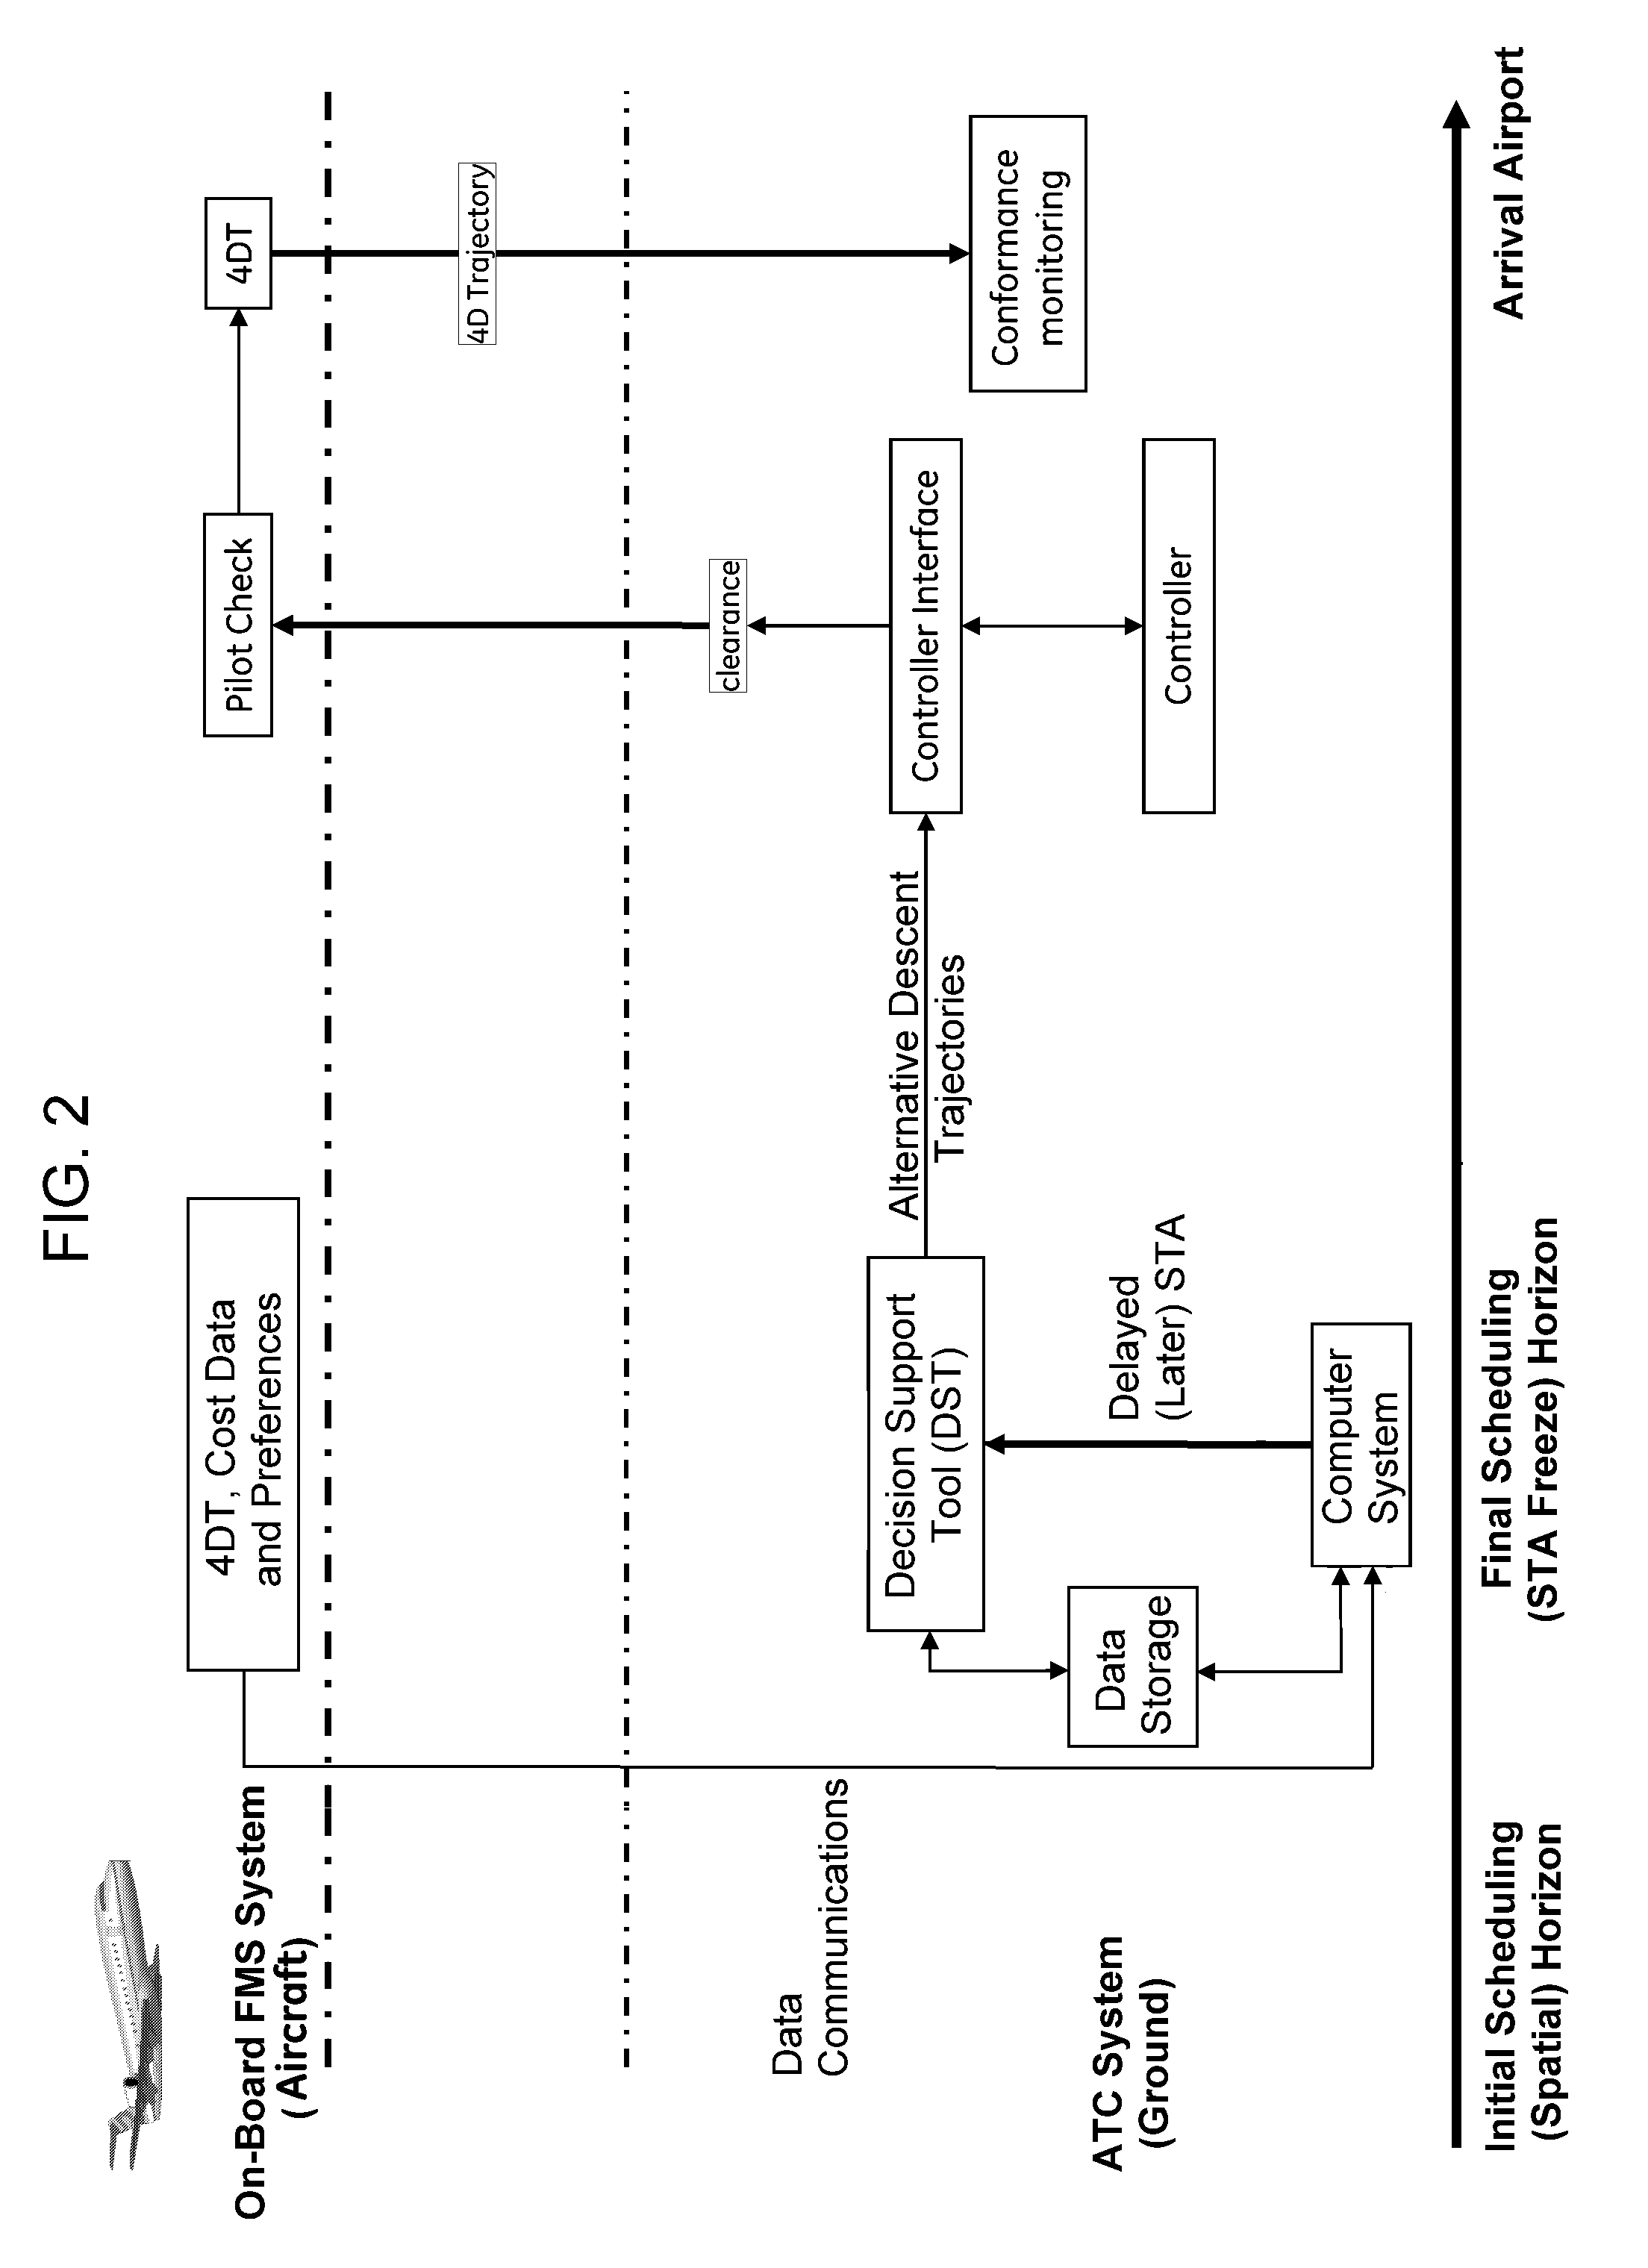 Schedule management system and method for managing air traffic